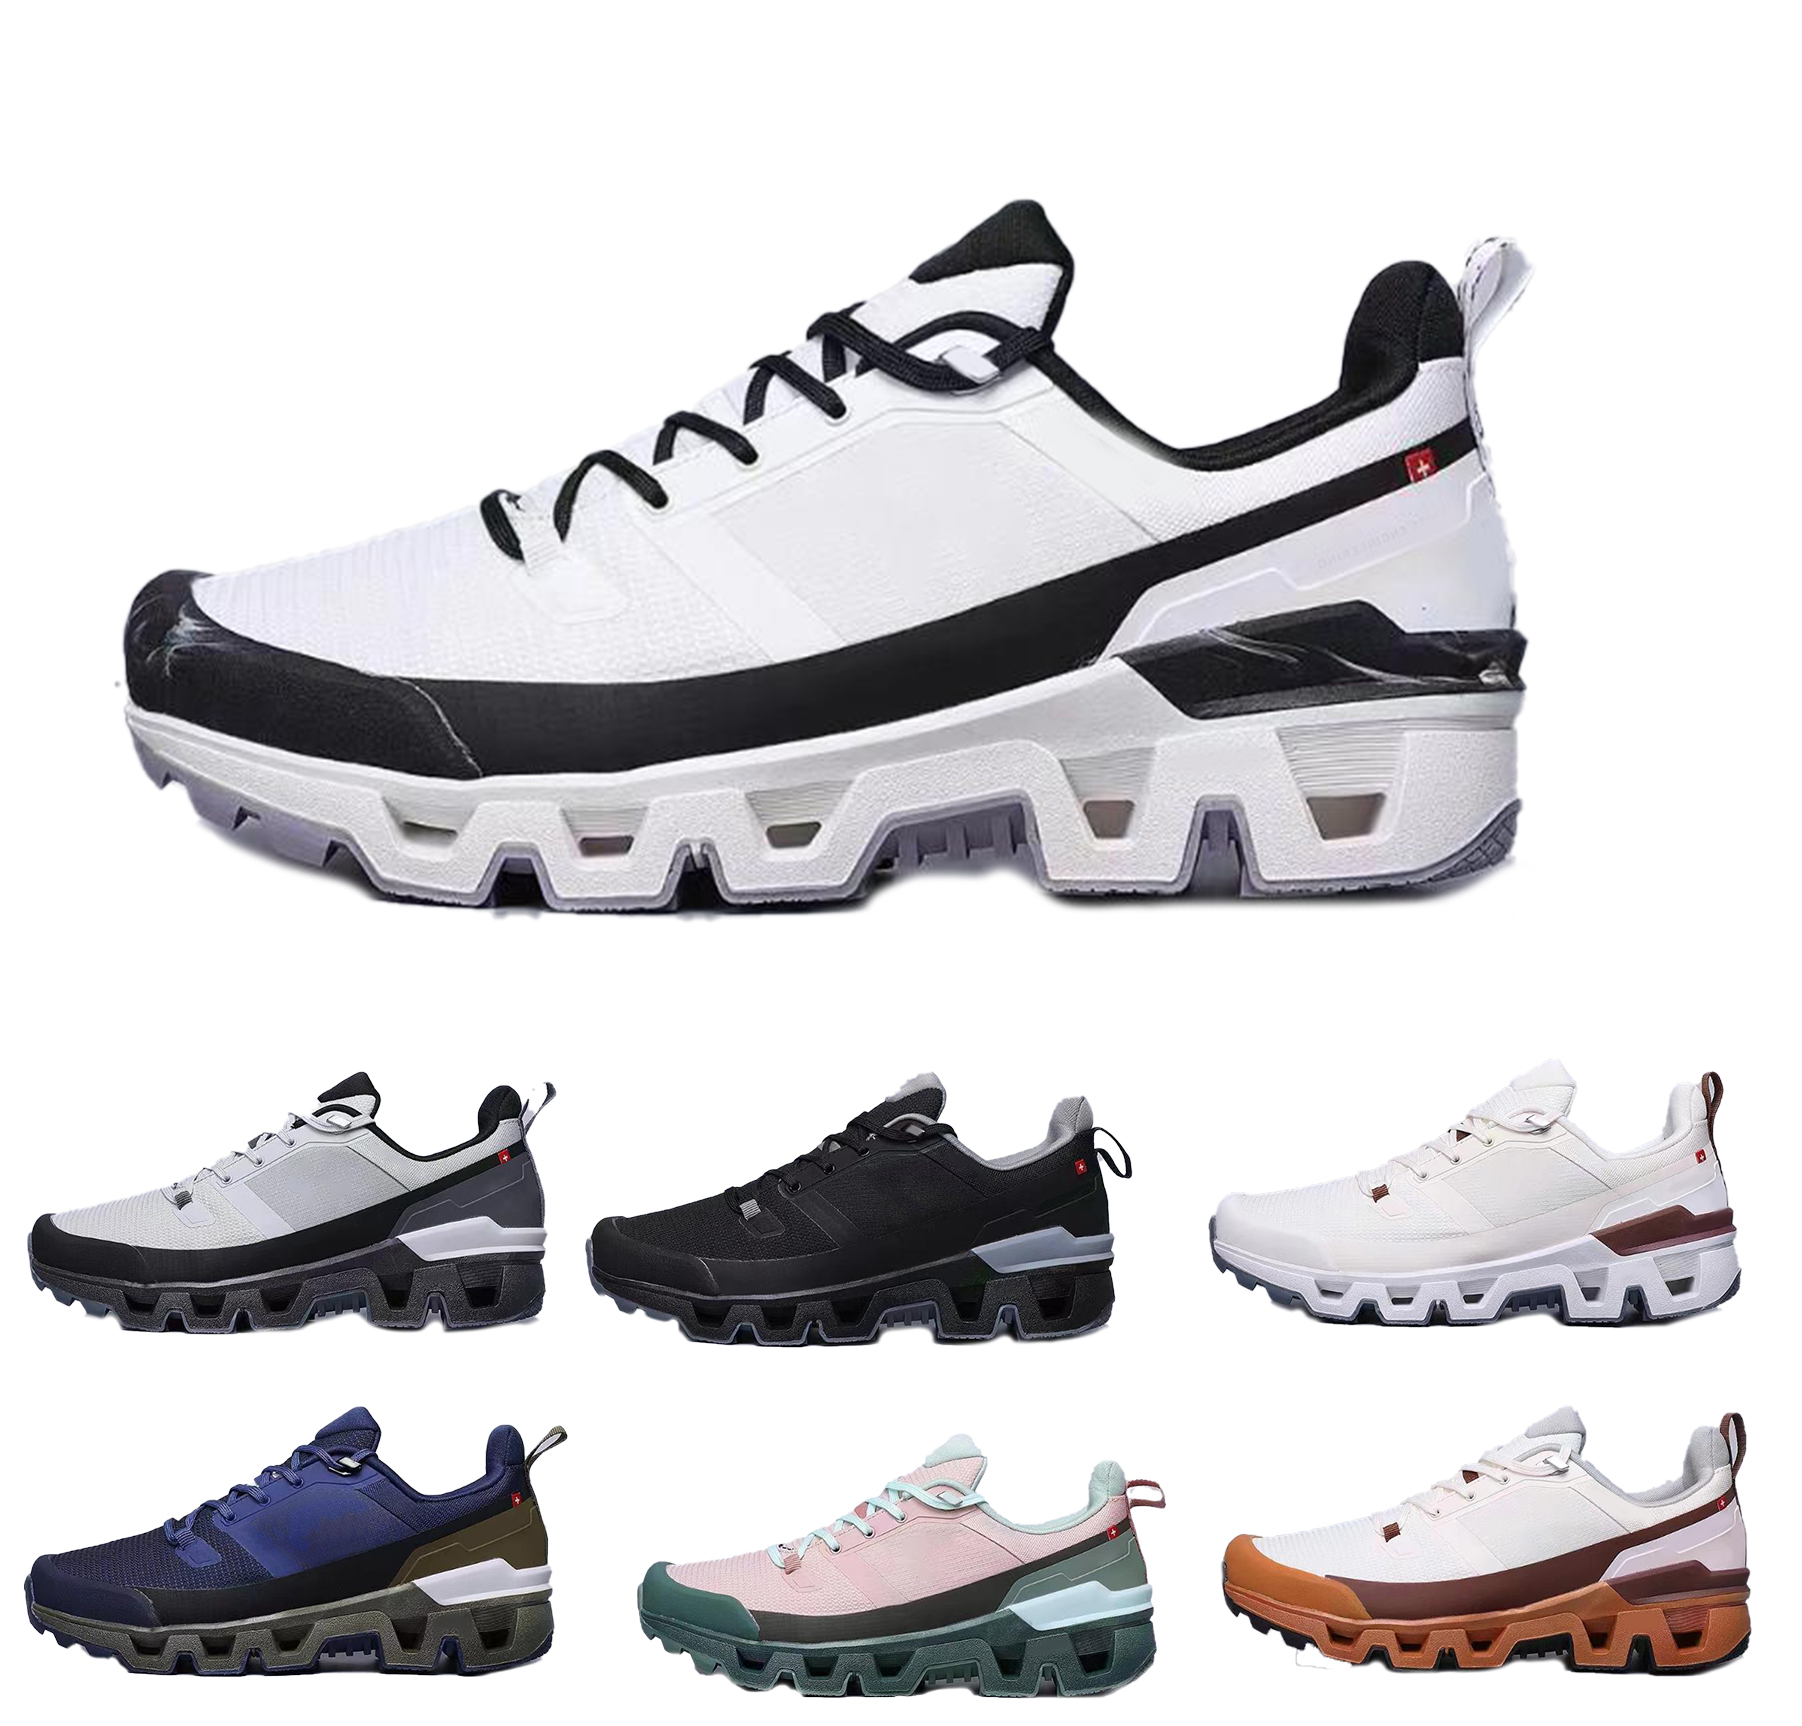 Wander Waterproo Randonnée Chaussures Multiuse Chaussure extérieure Tennis Yakuda Sneakers populaires Store Tennis School Sports Dhgate Running Shoes Classic Party Daily